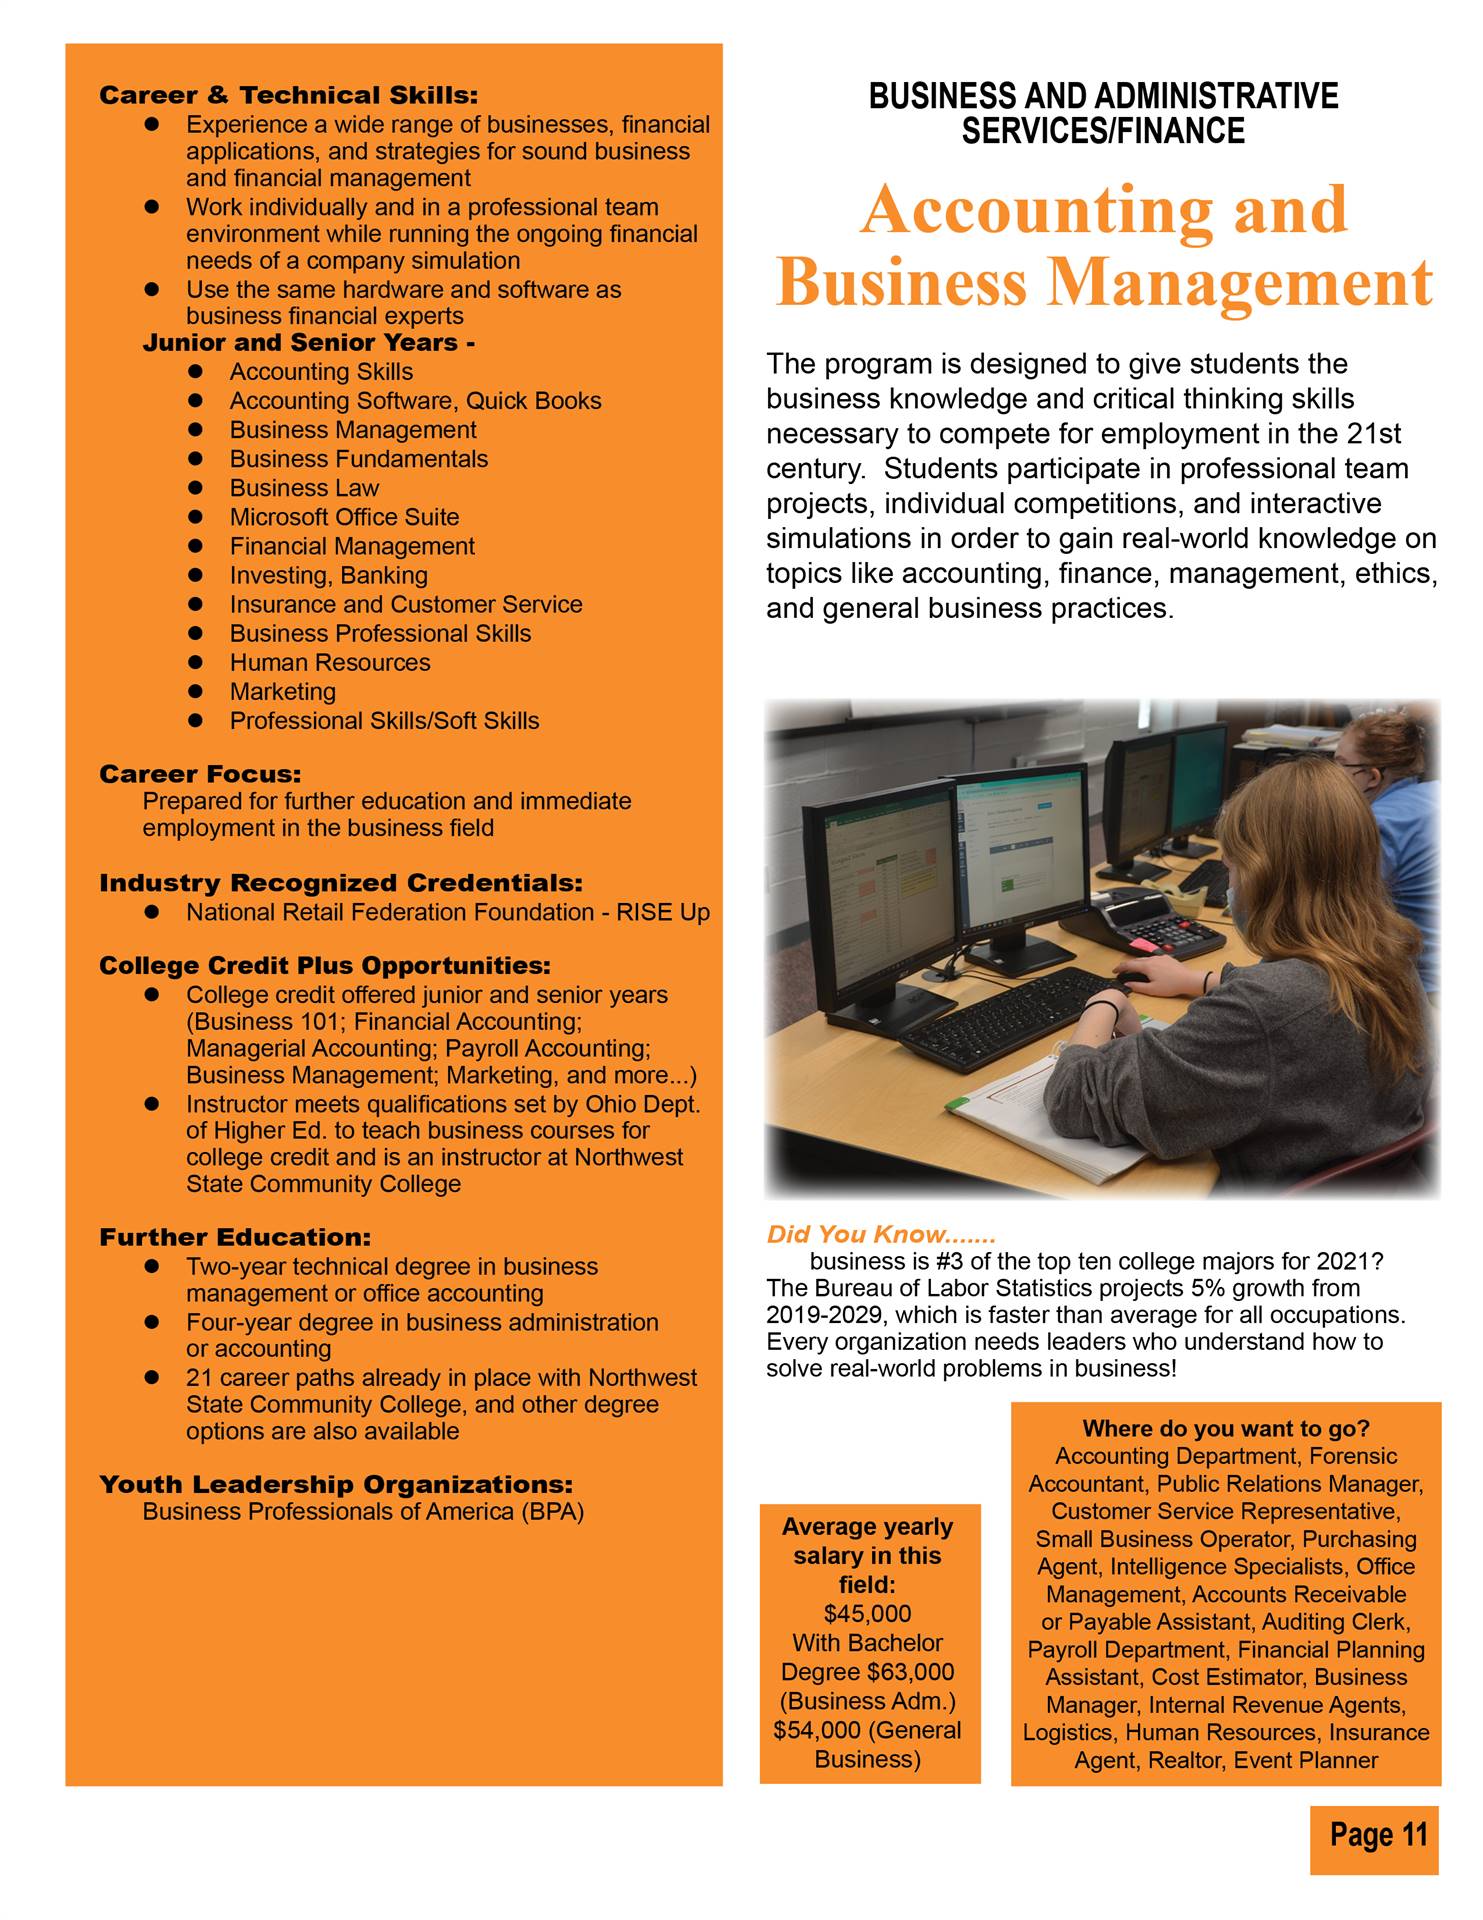 Accounting & Business Management